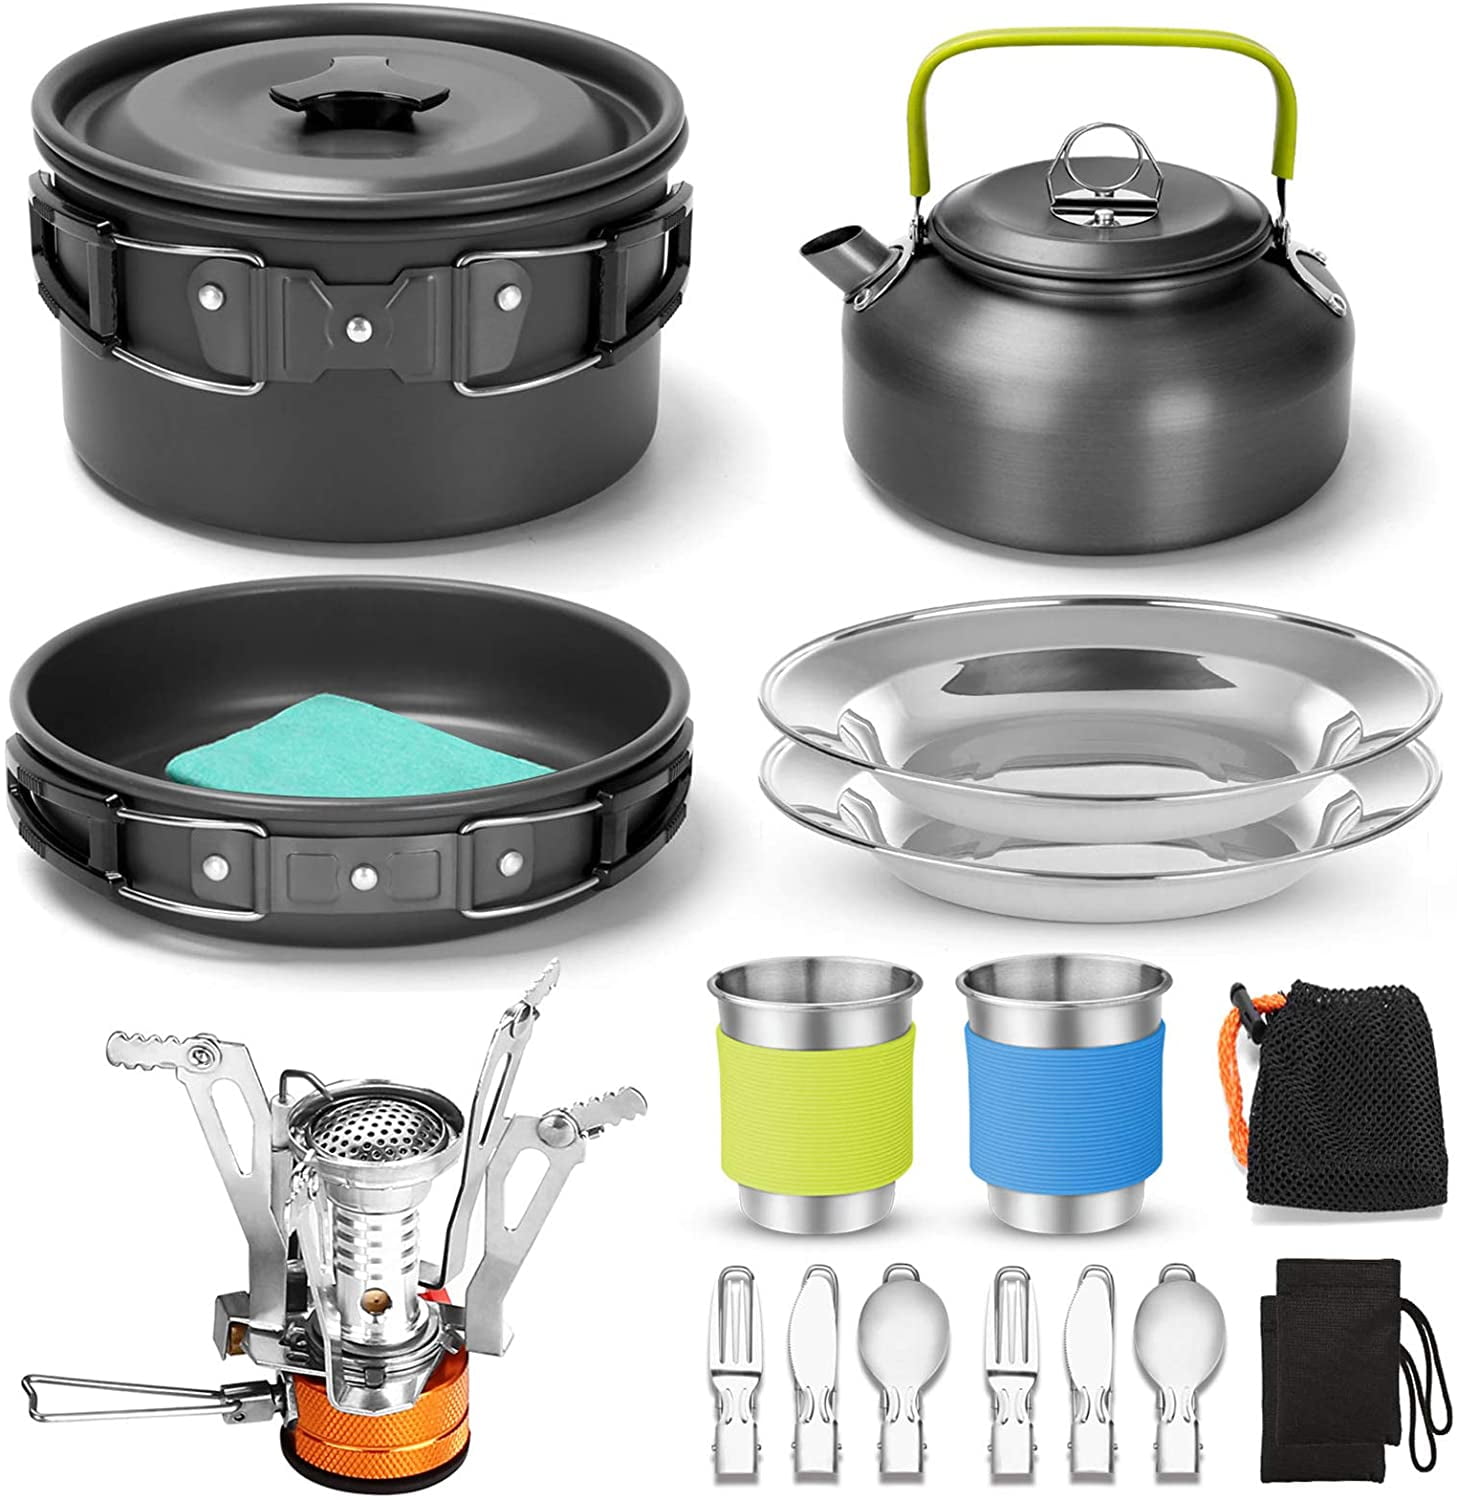 Camping Mess Kit Camp Tableware 4 Person Family Set with Plates Cups Mugs Forks Spoons 18-Piece Colorful Plastic Camping Dishes Set for 4 Camp Dinnerware Set with Box 